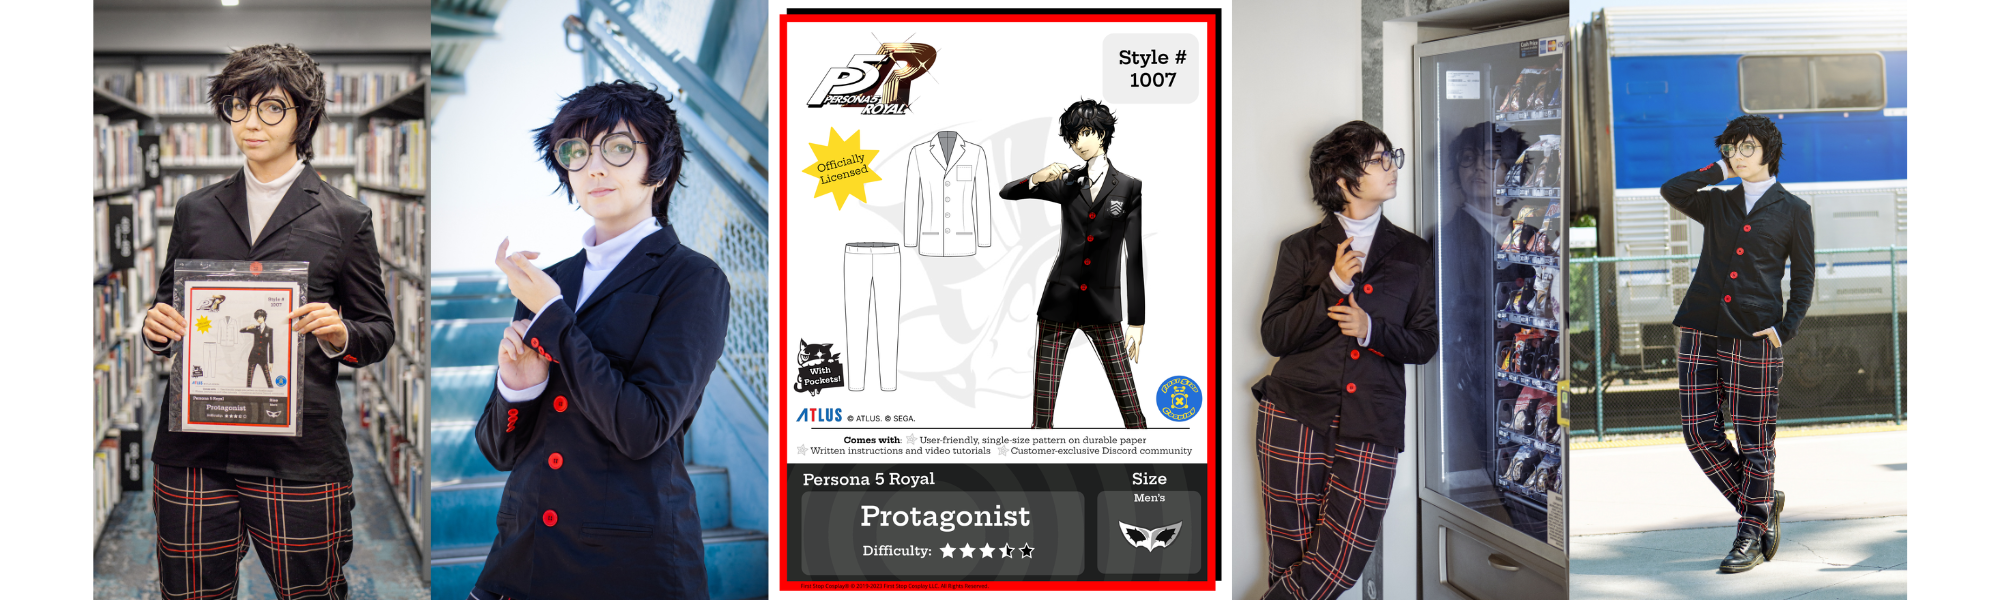 Persona 5 Royal Protagonist sewing pattern collage featuring packaging and modeled Protagonist cosplay.